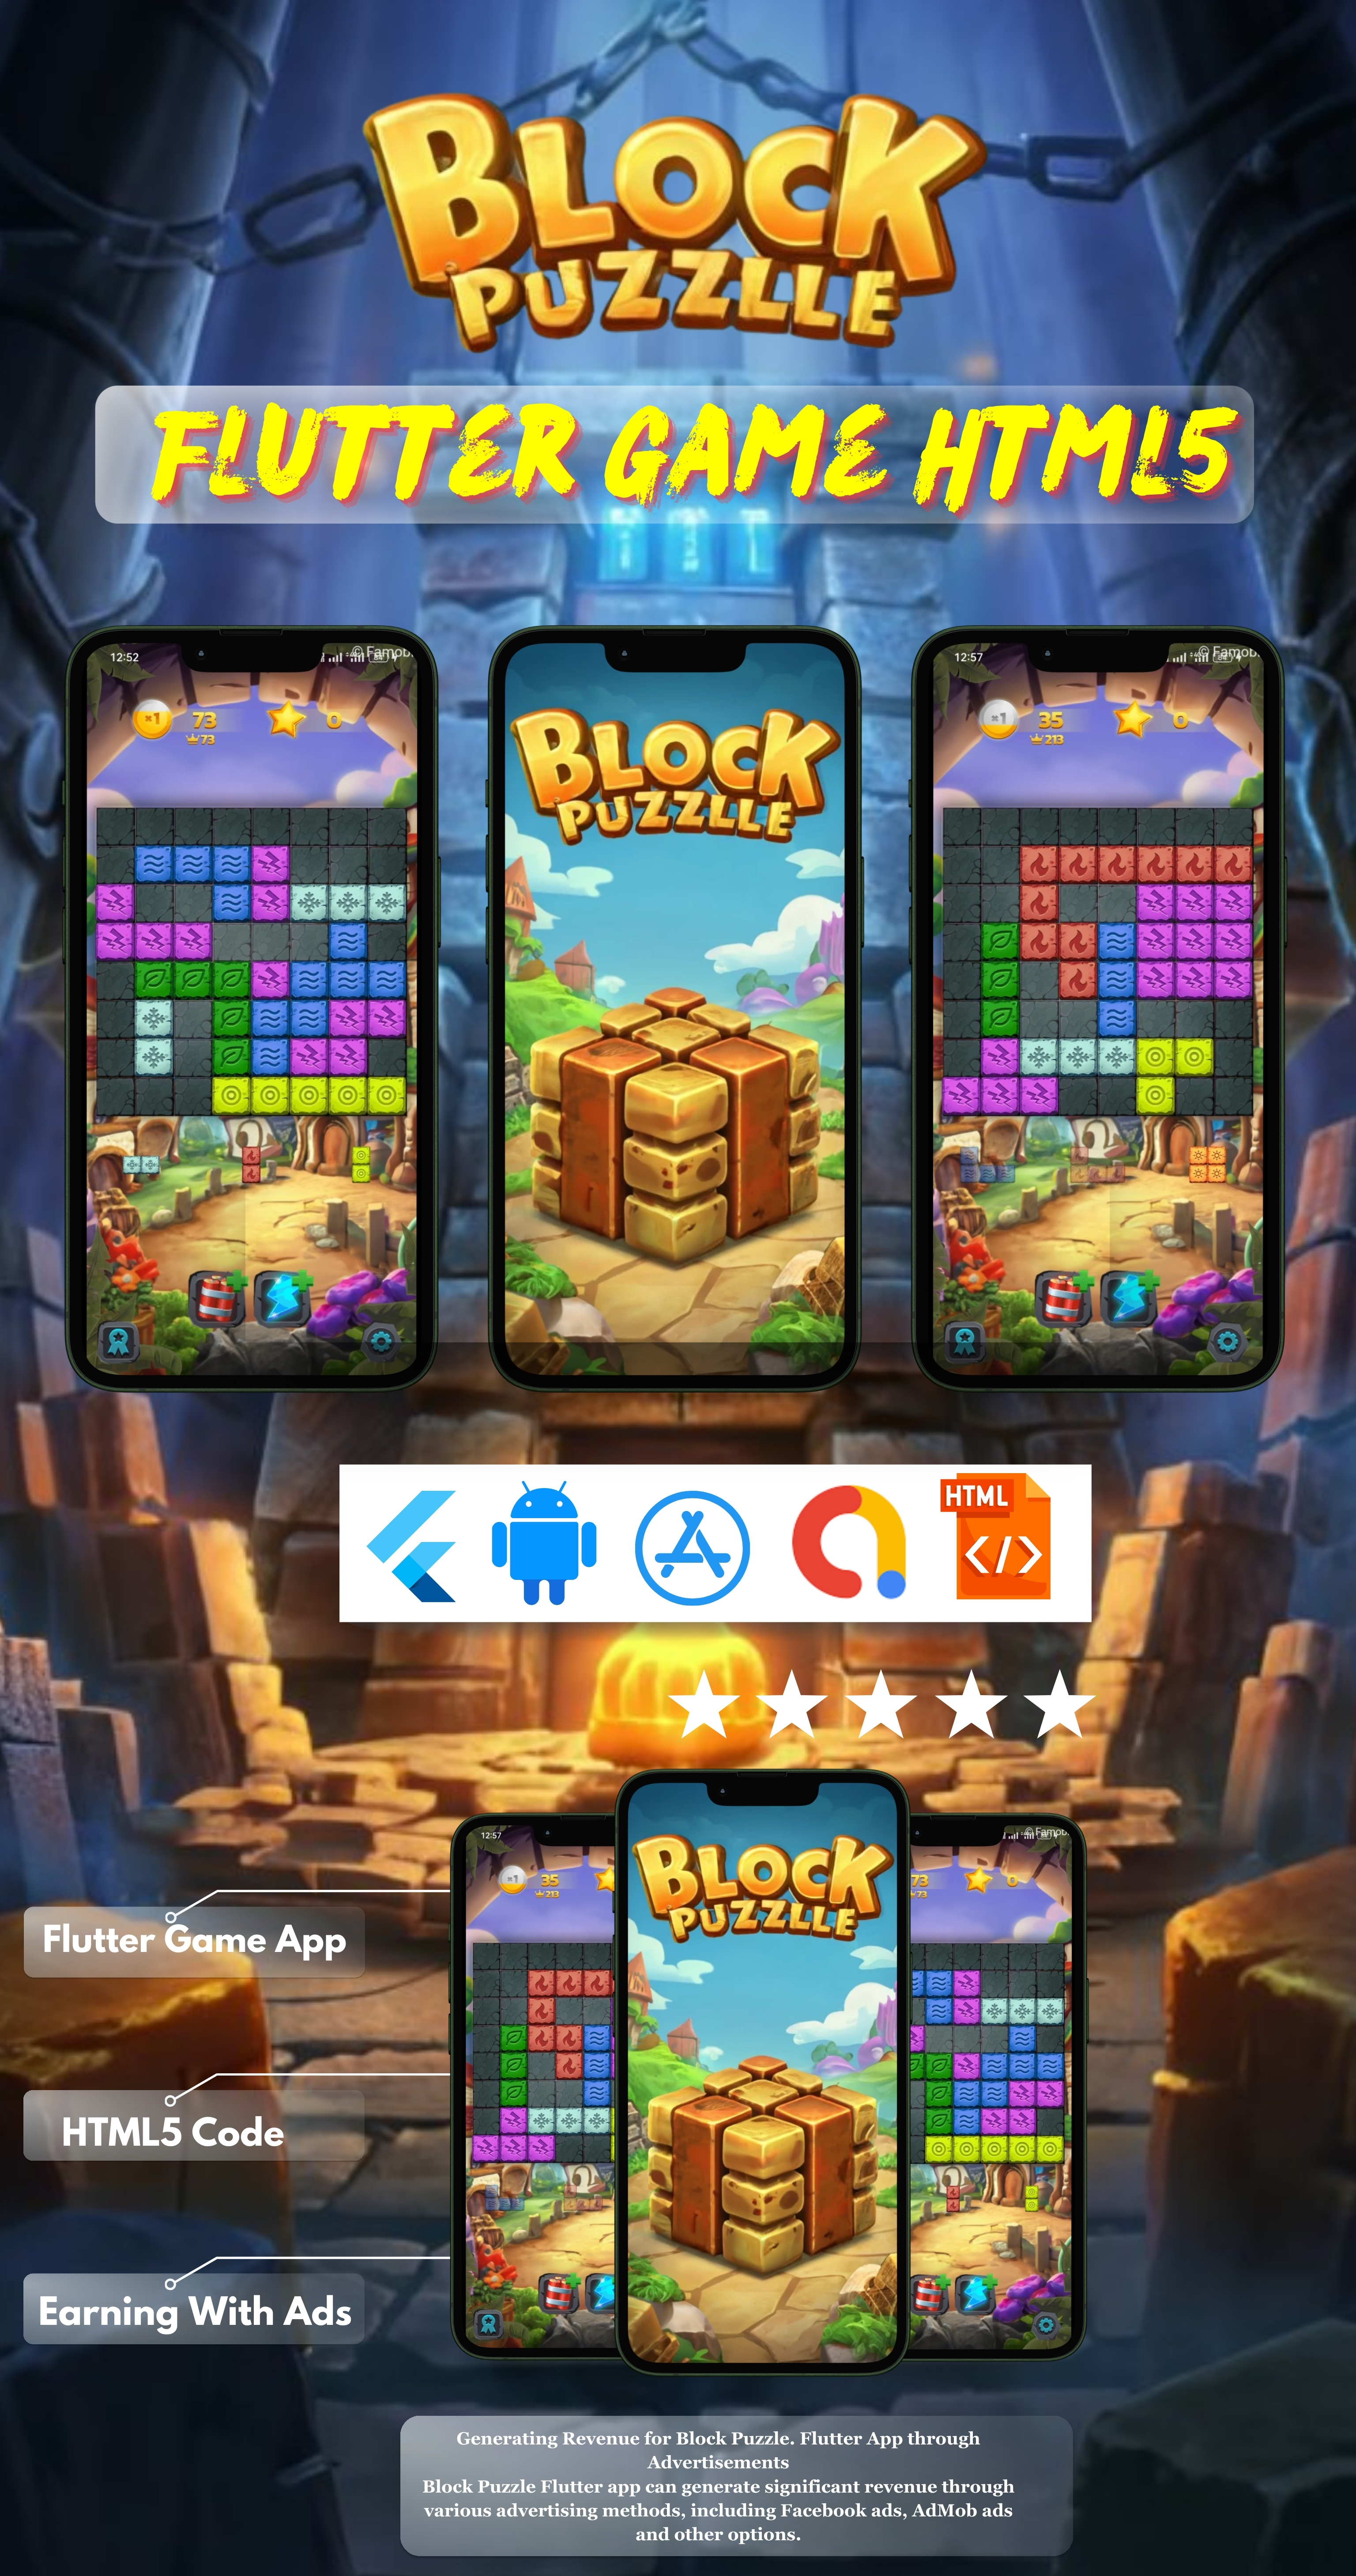 Block Puzzle Flutter Mobile Game App With HTML5 Code - 1